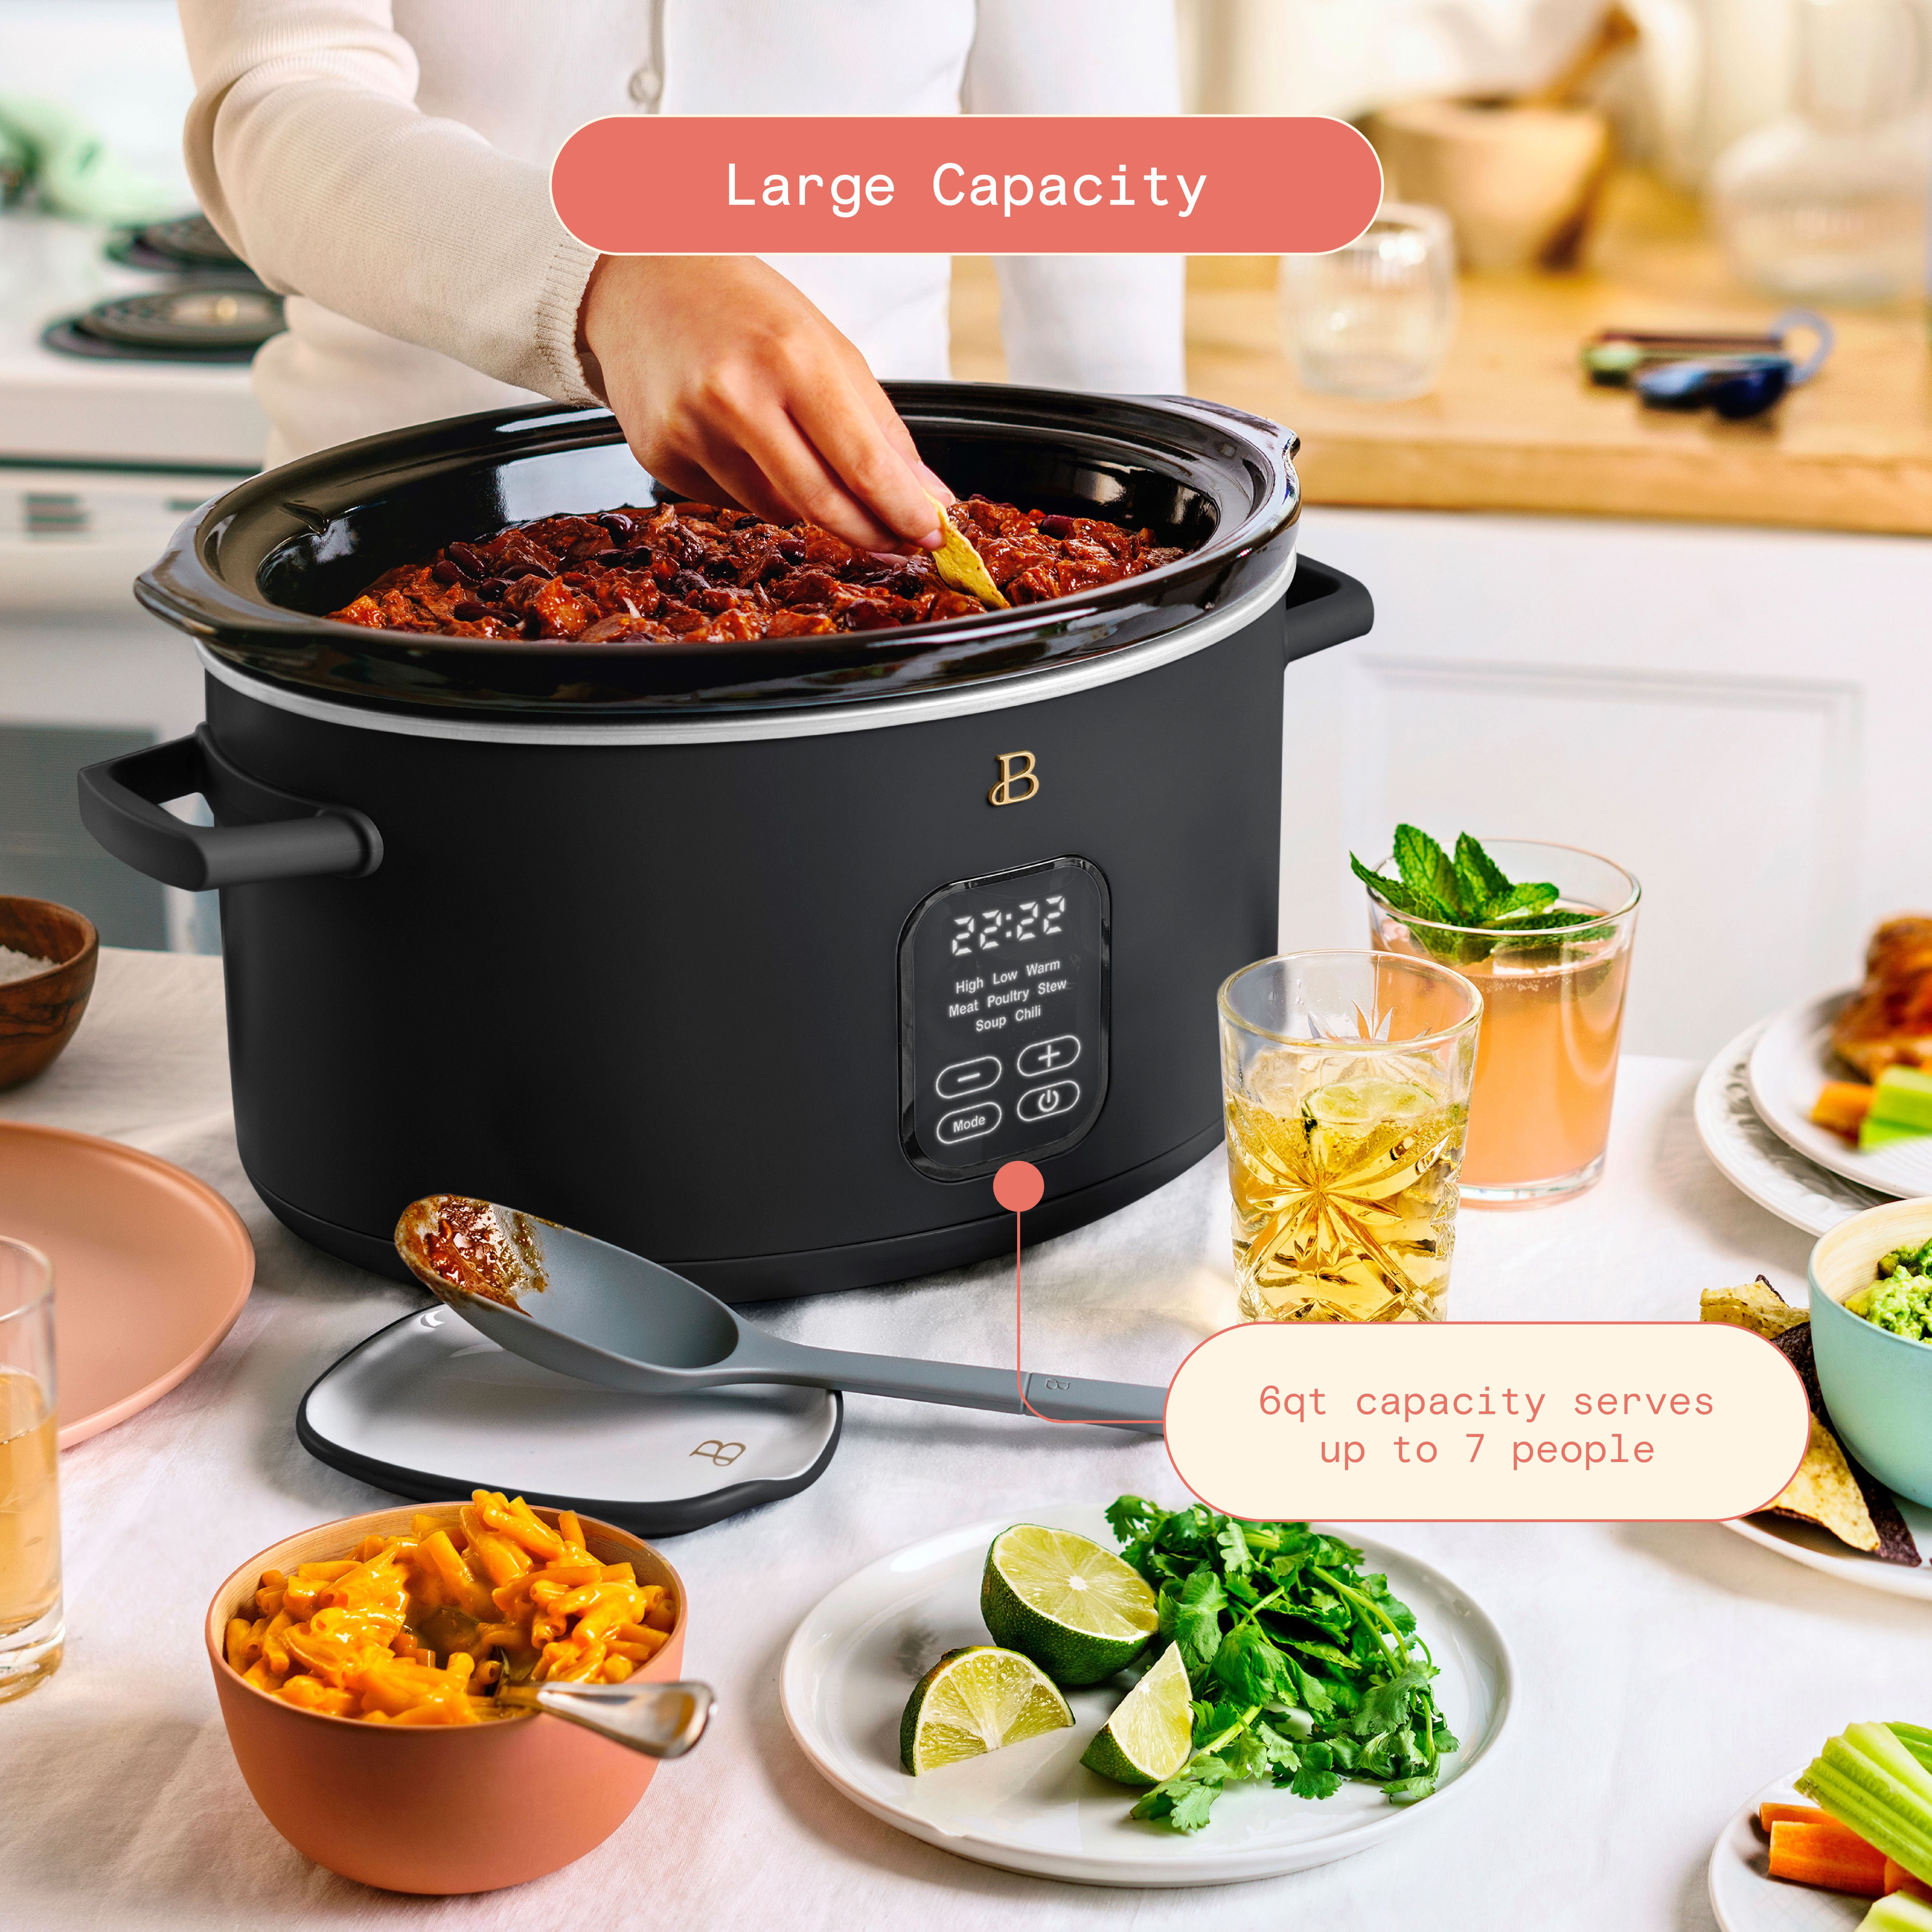 This Crockpot Slow Cooker With 21,900+ Perfect Ratings is Just $40 at   Right Now